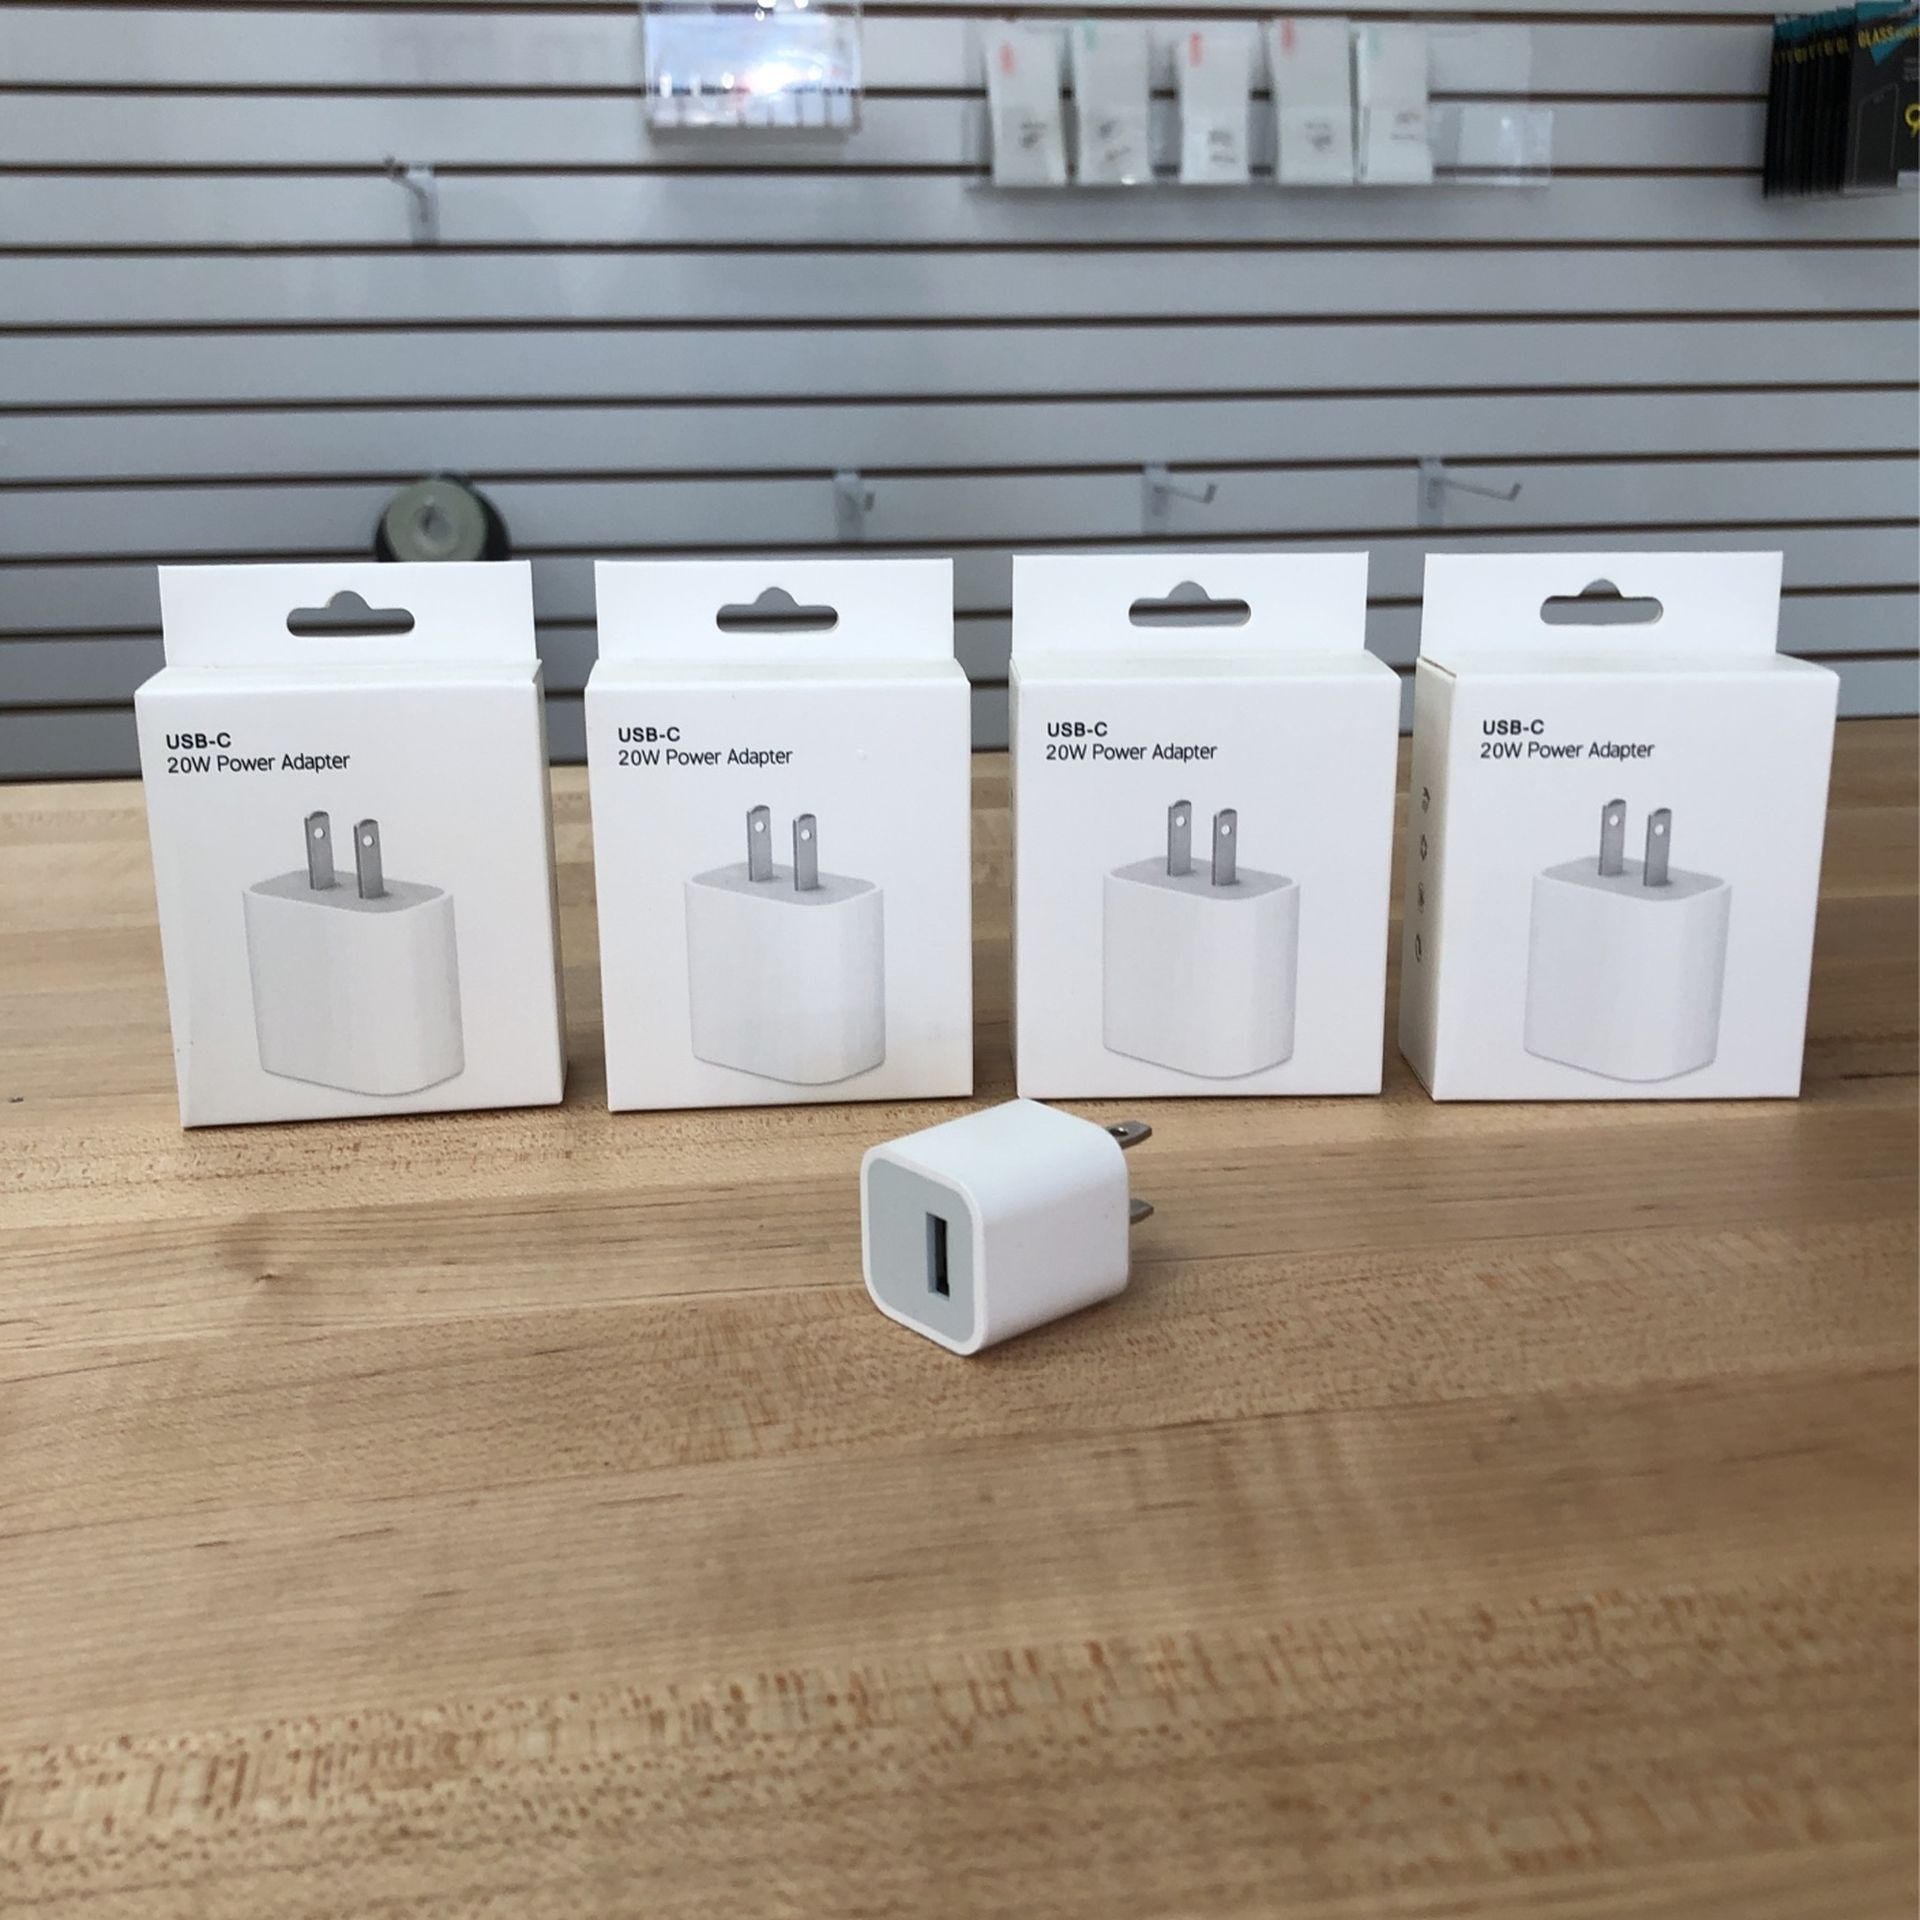 *New* USB-C Power Adapter iPhone Charger 